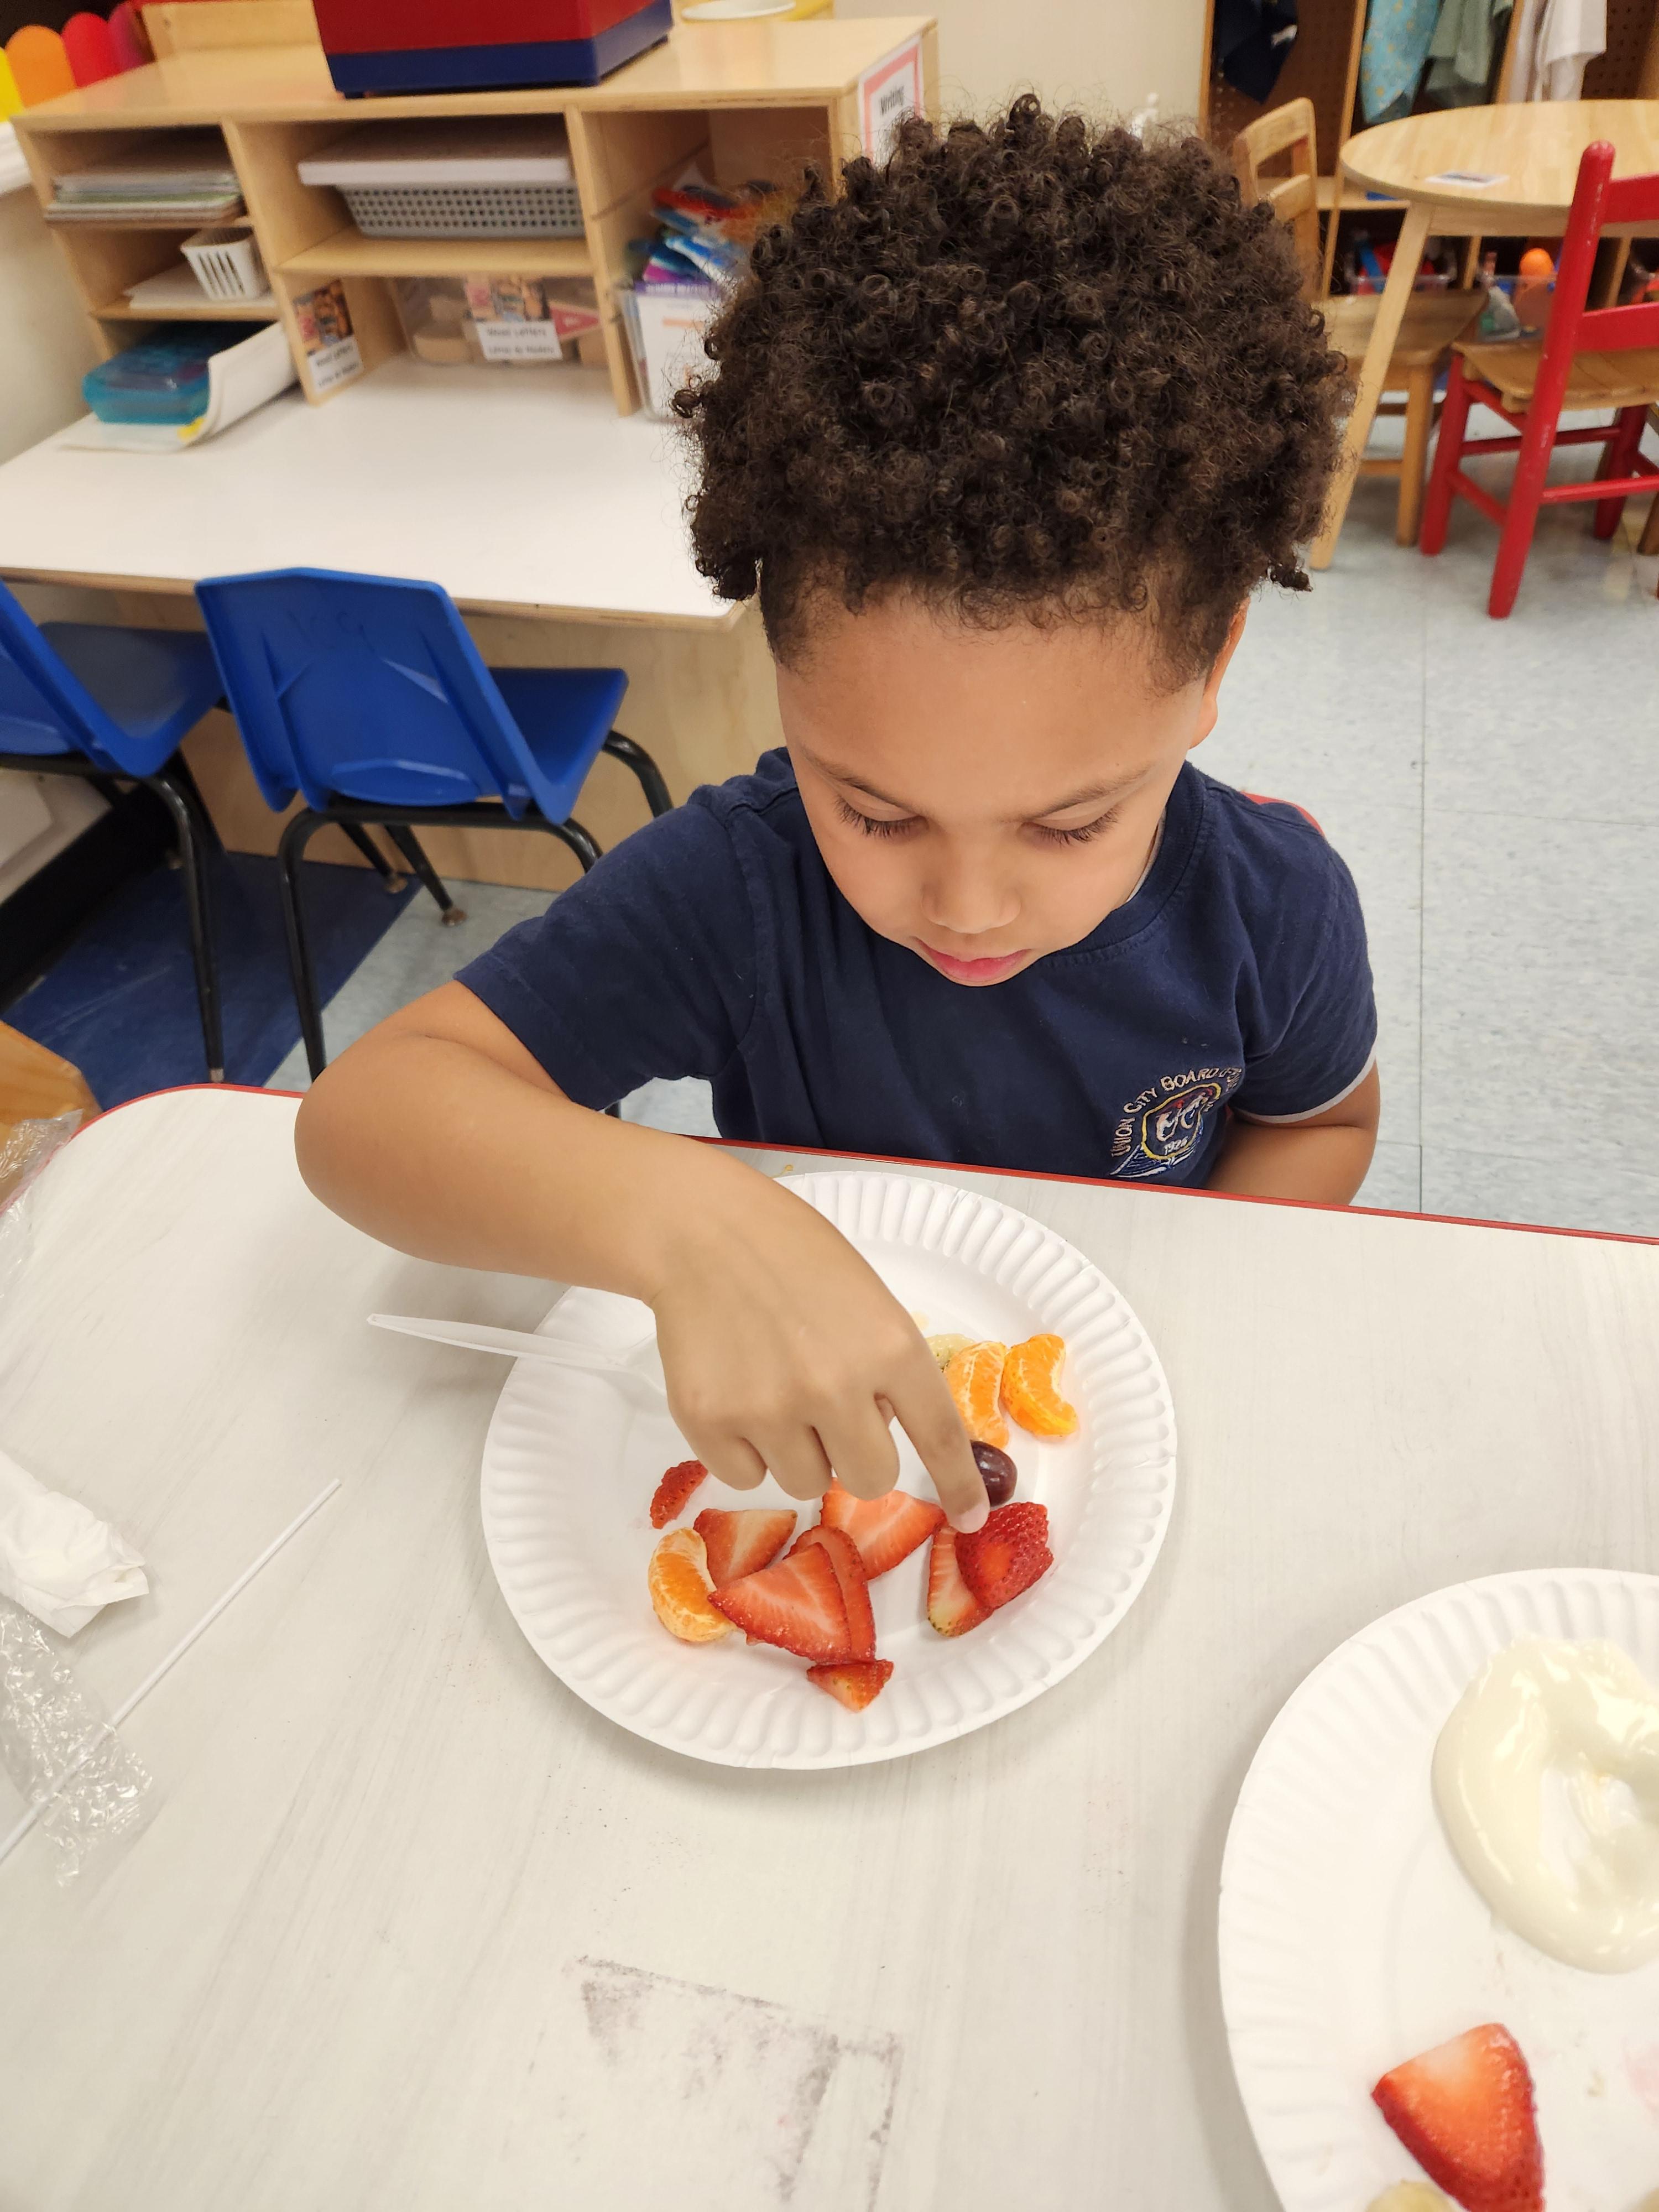 Tasty Tuesday at the Jefferson School